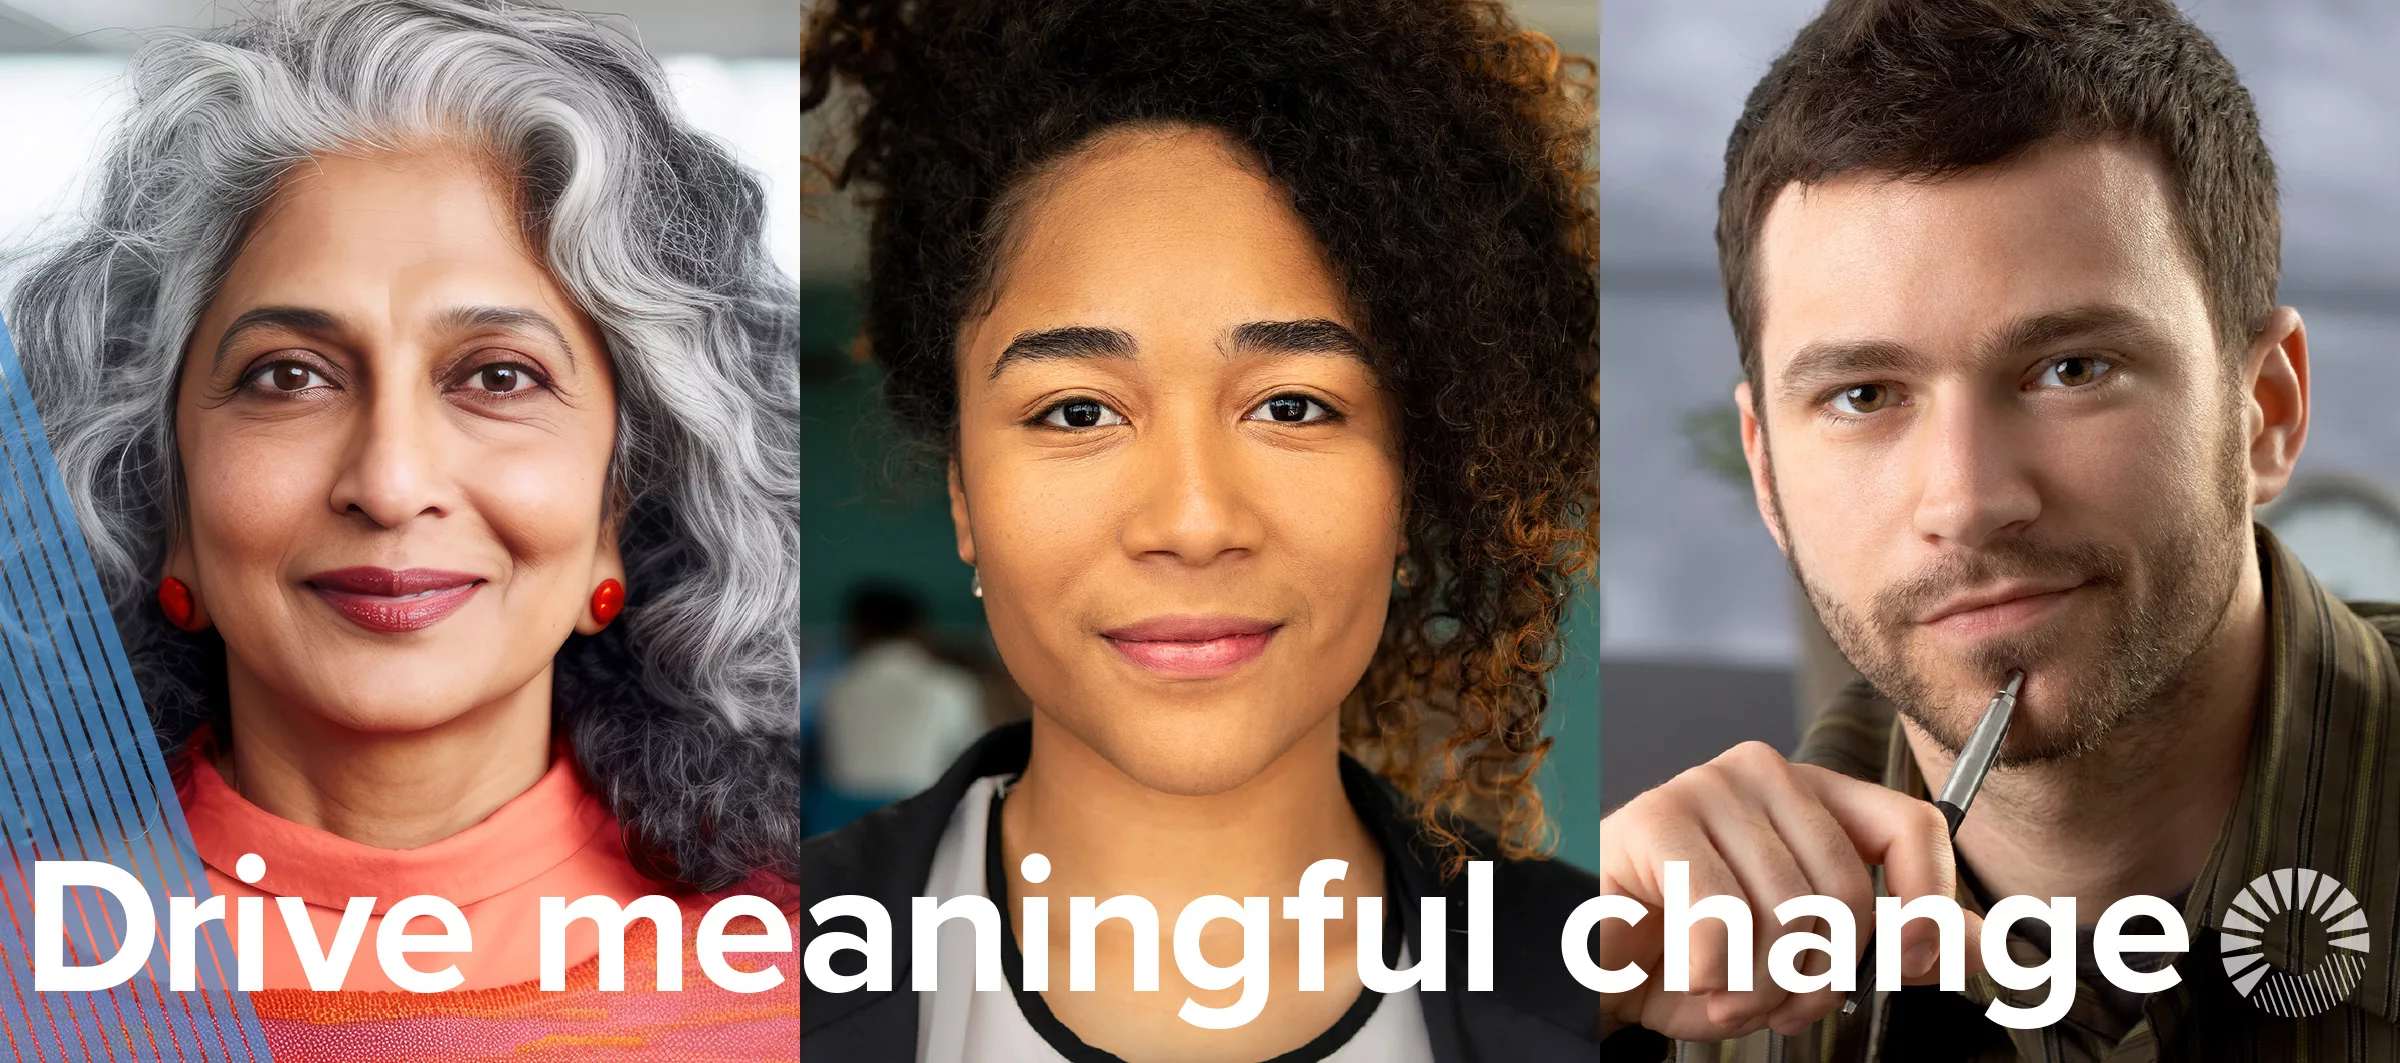 Drive meaningful change. Three diverse individuals smile at directly at the camera.